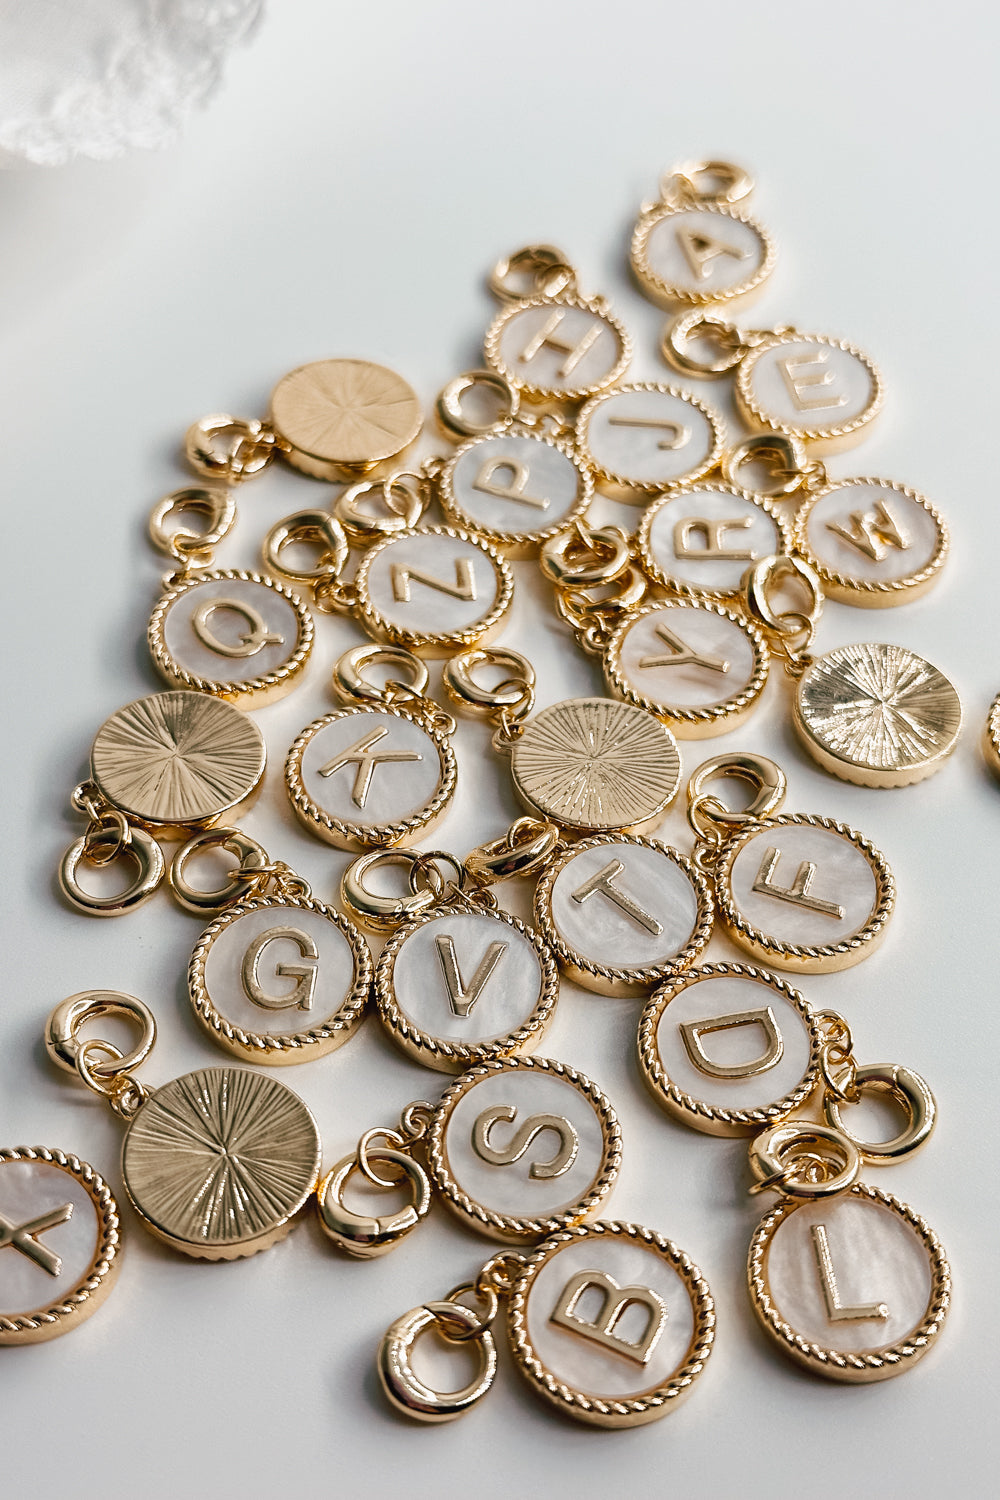 Image shows an assortment of the Alphabet Charms against a white background. Some charms are face up and some are face down. Charms are gold circles with white center and gold letter.